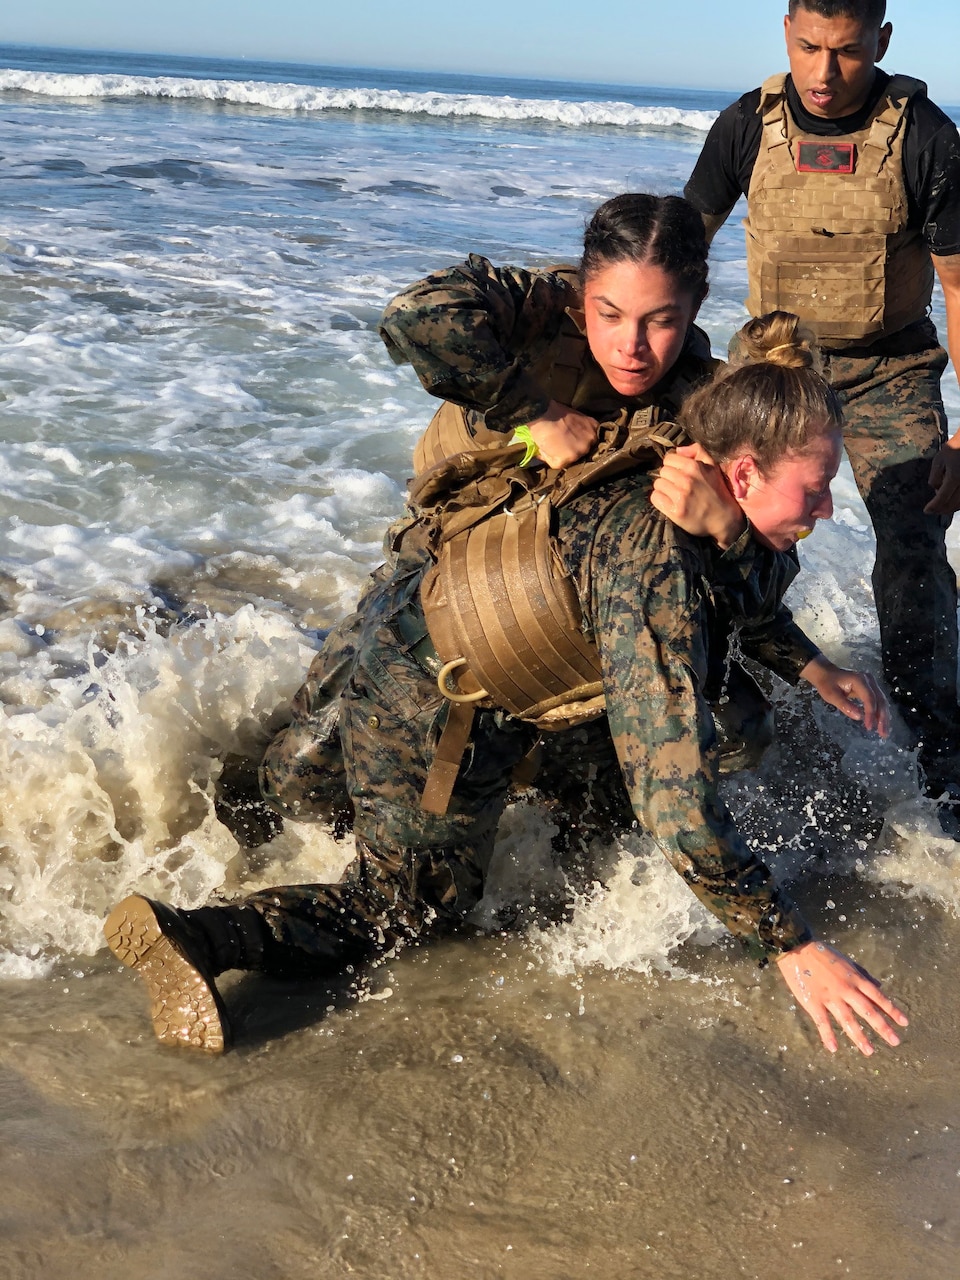 A male Marine watches two female Marines who are practicing martial arts in the ocean near a beach.